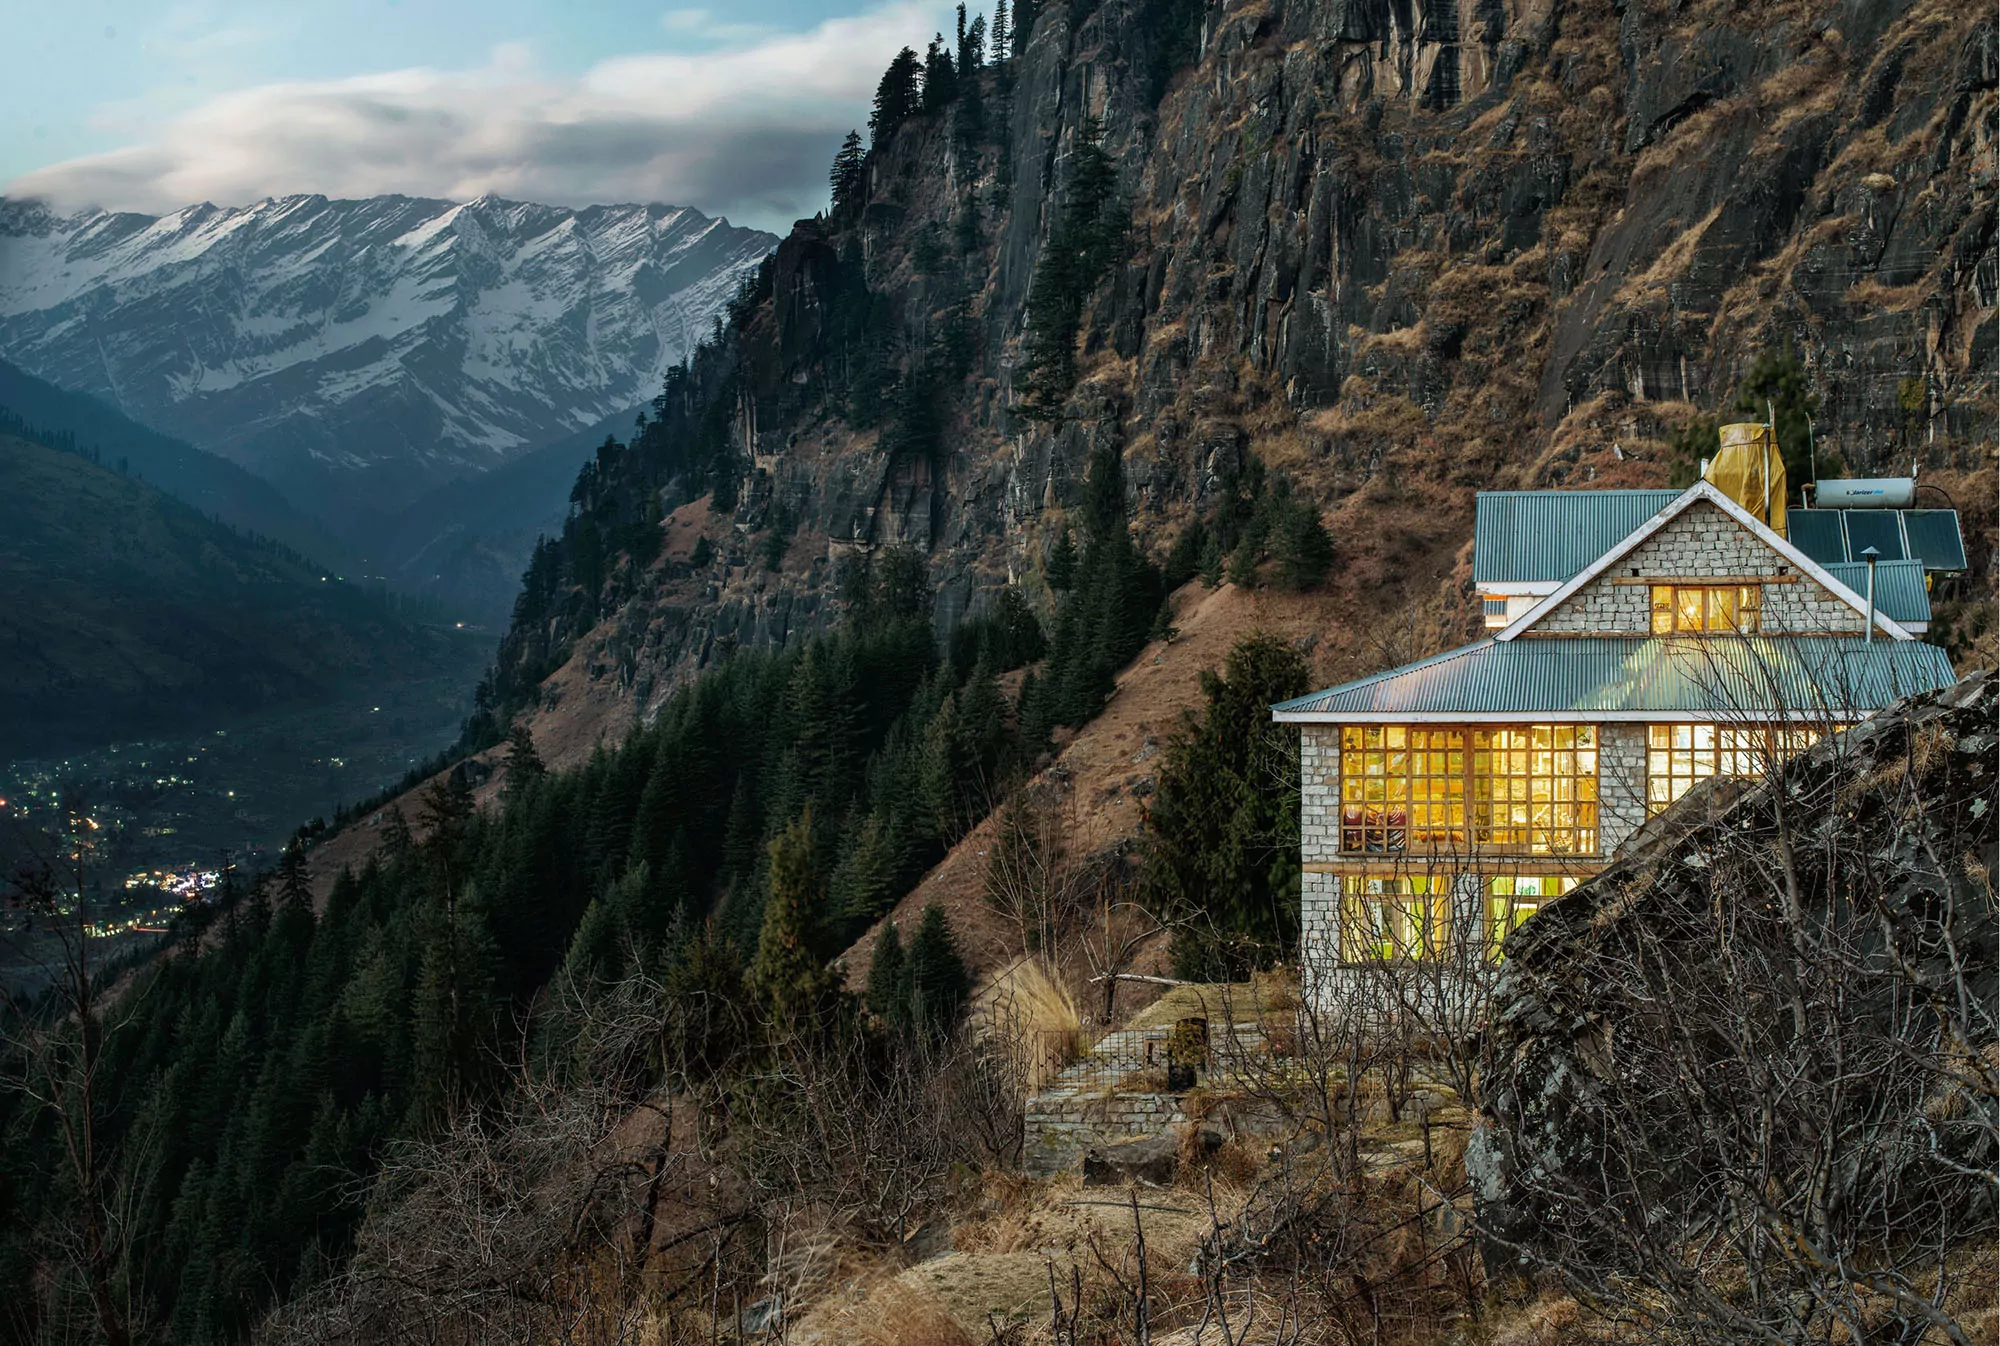 Secluded house on the mountainside